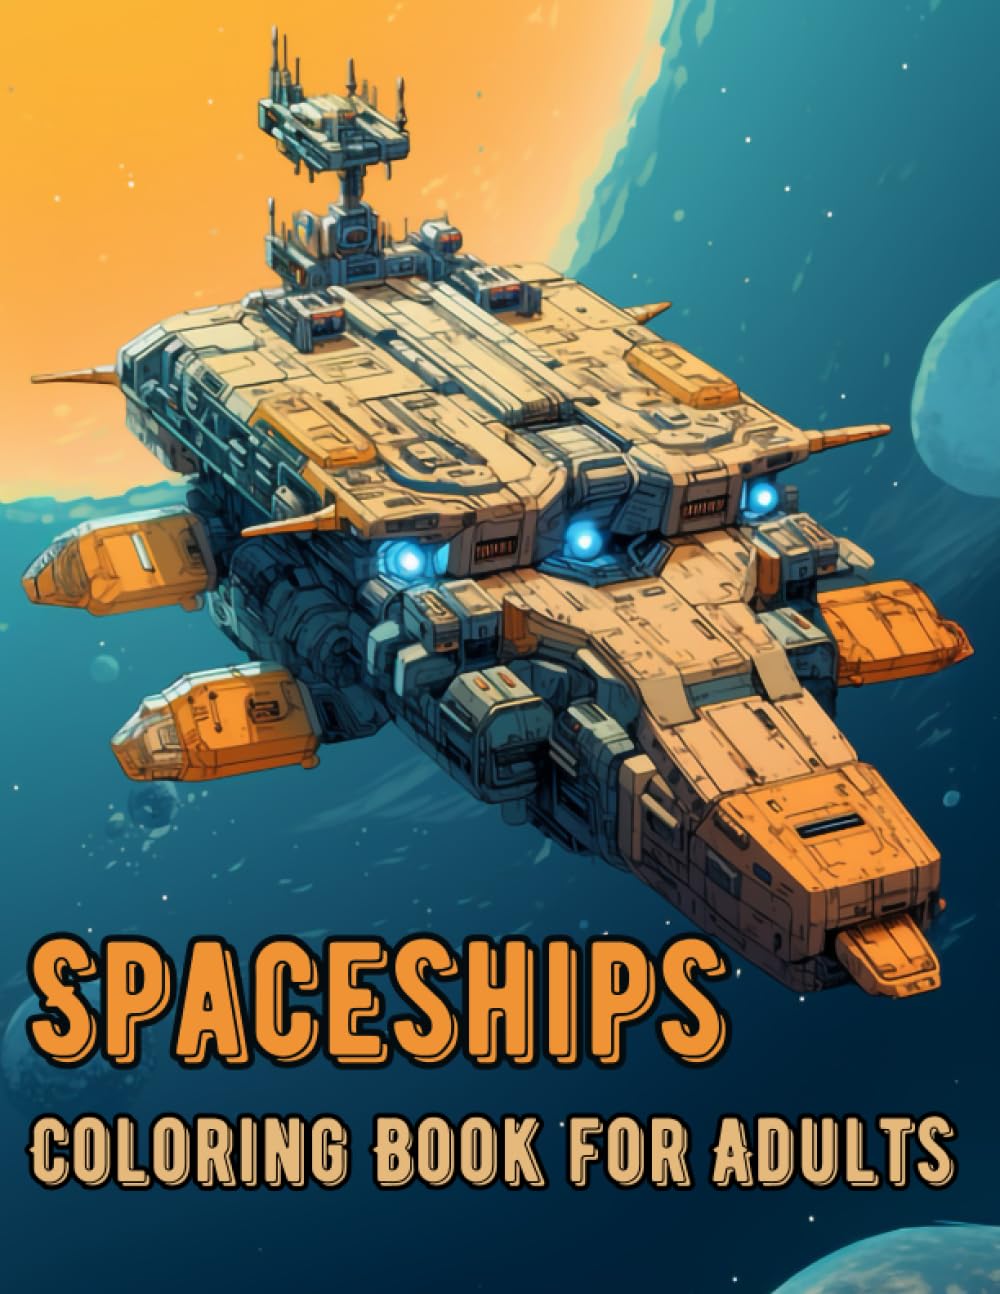 Spaceship Coloring Book for Adults: 50 Science Fiction Illustrations for Relaxation and Creativity